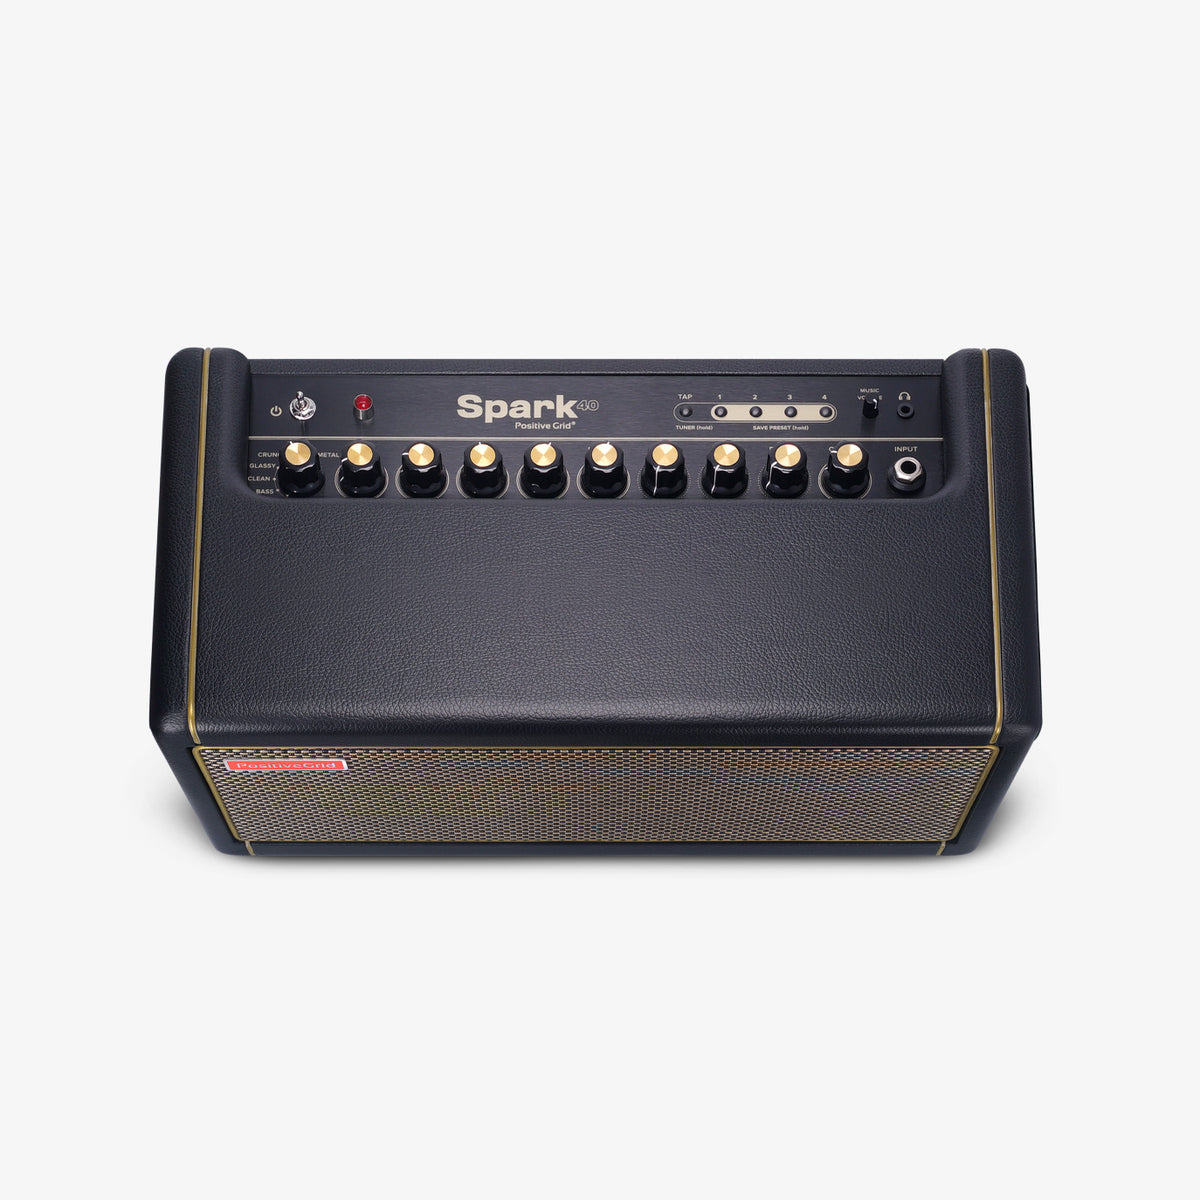 I have a Positive Grid Spark Mini guitar amp, and I just found out